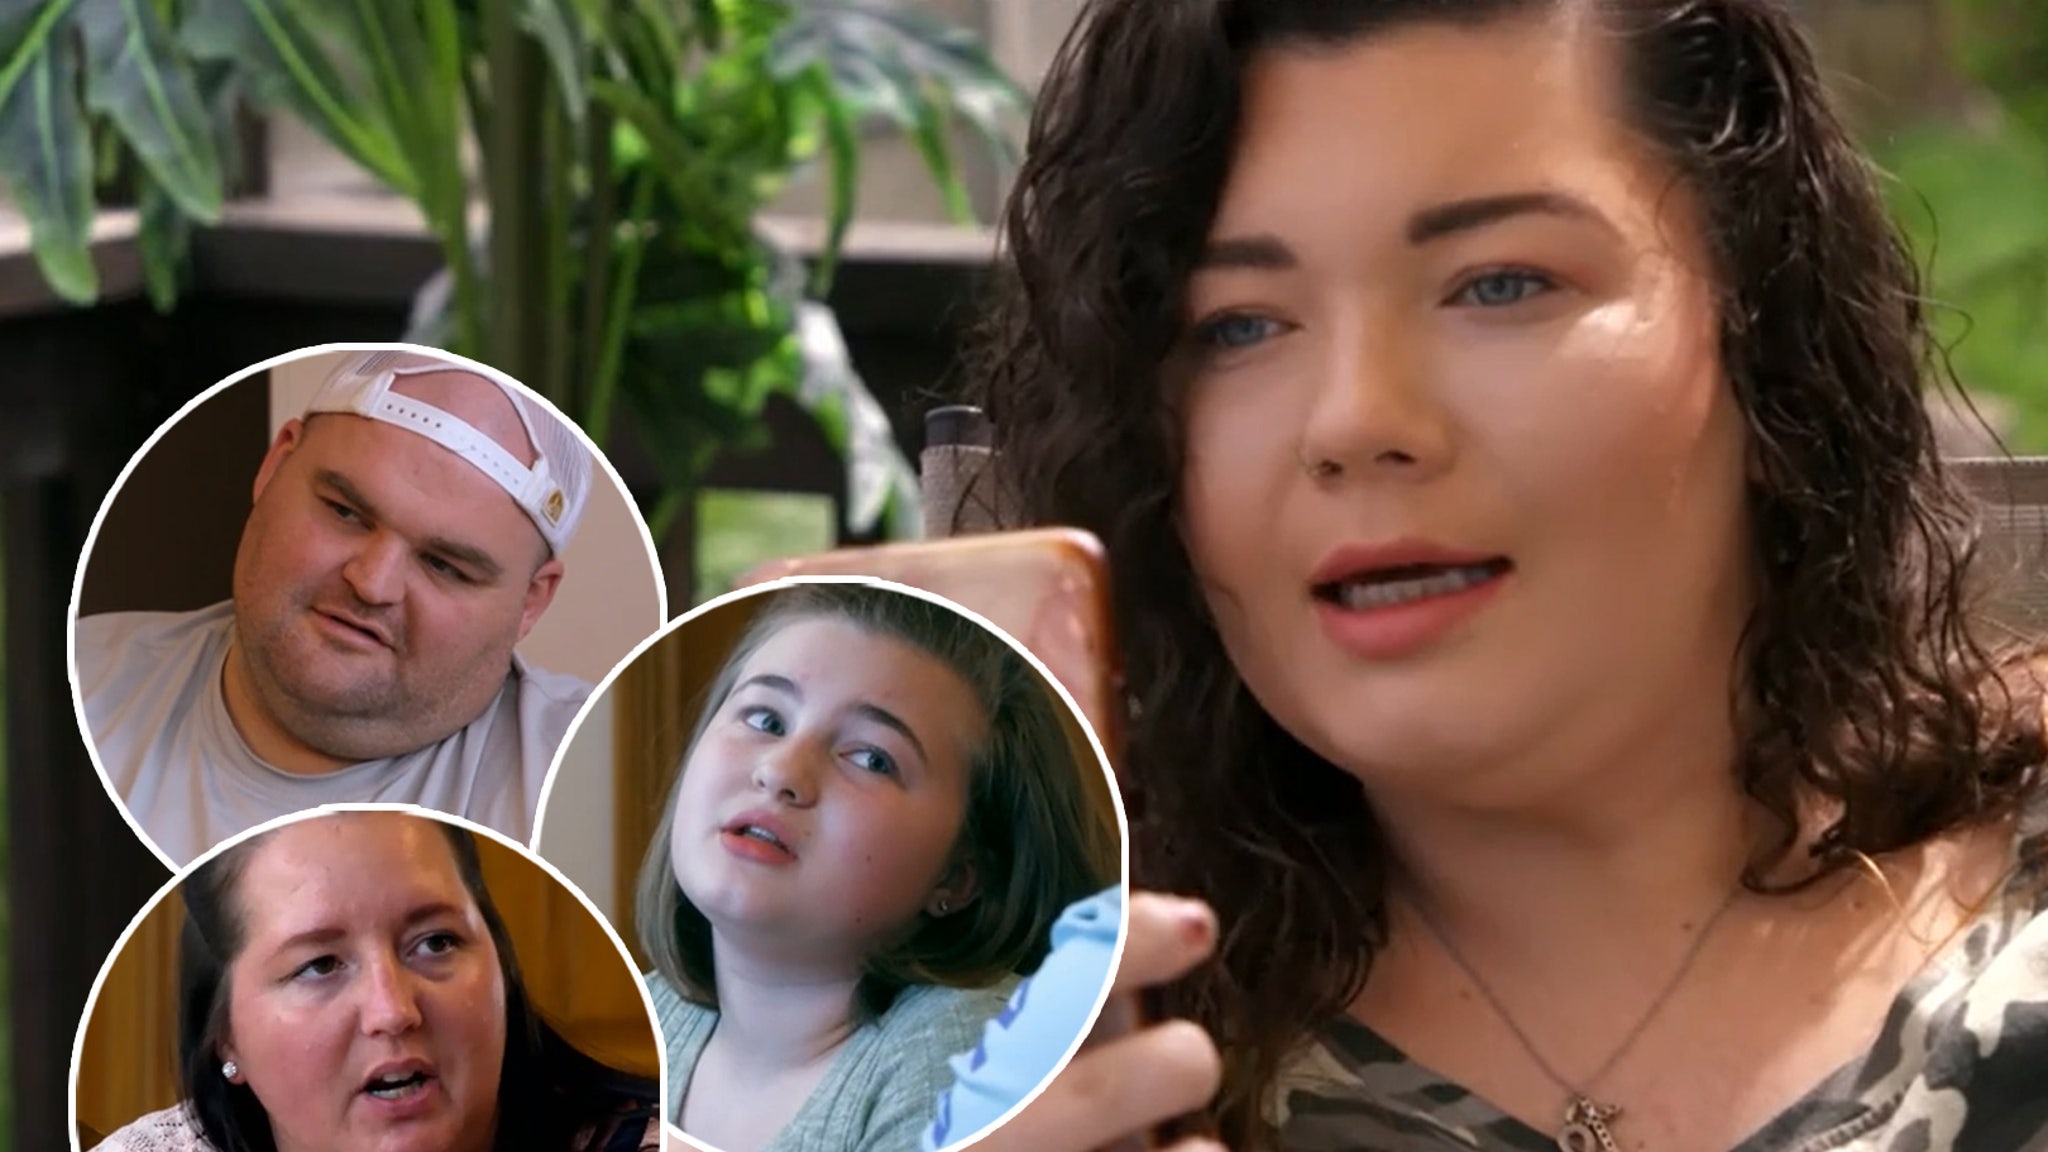 Teen Mom S Amber Portwood And Daughter Leah Struggling With Relationship On Season Premiere